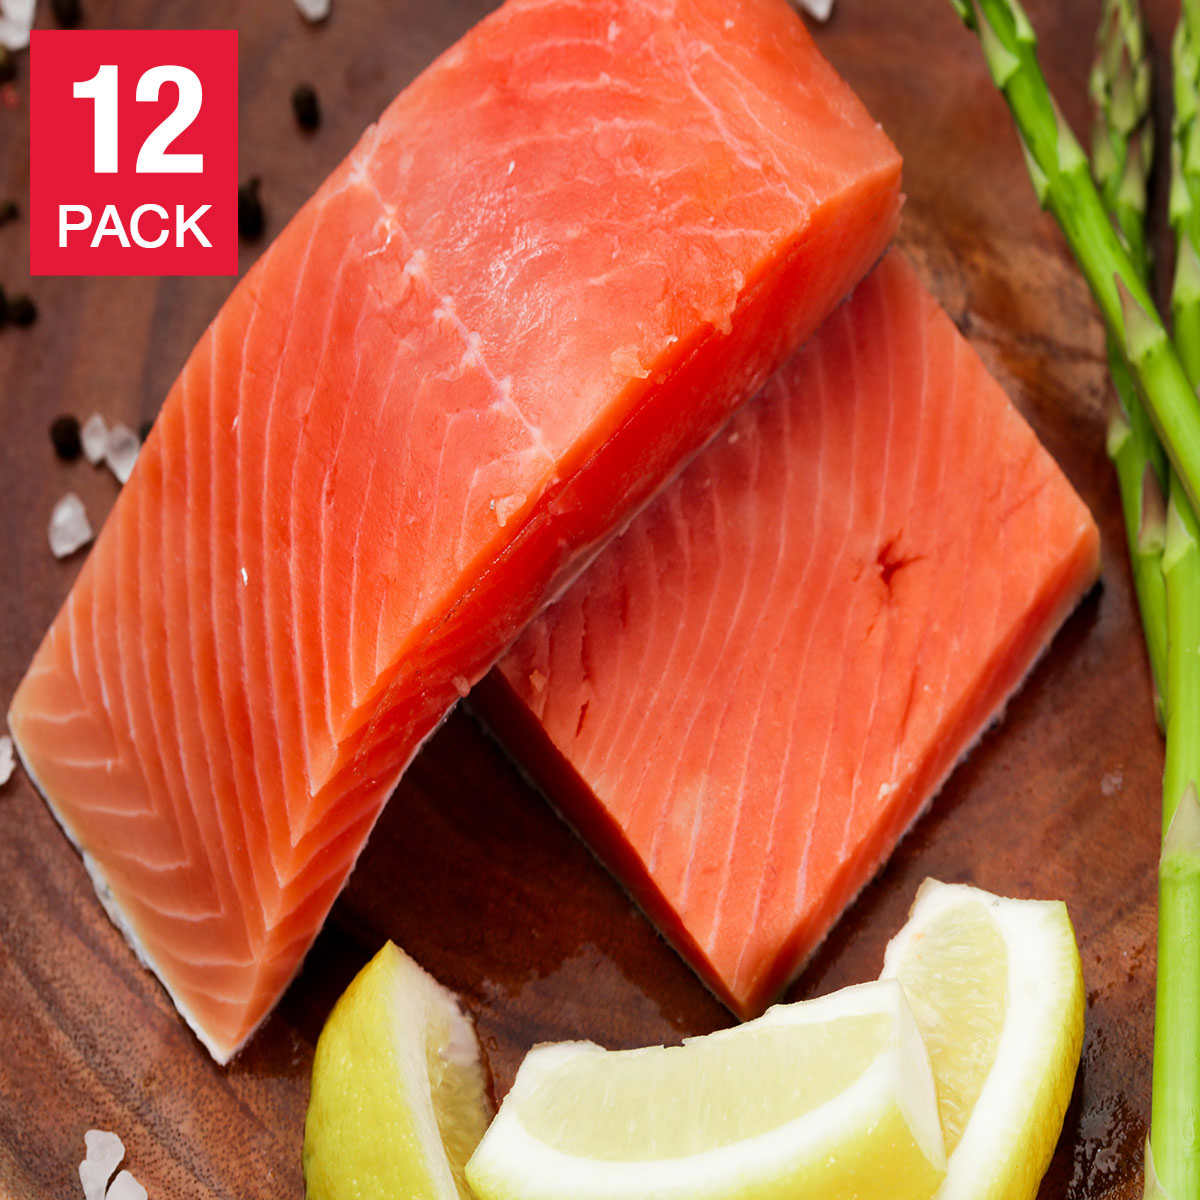 Northwest Red King Salmon Portions, 12 Total Count, 1 Case